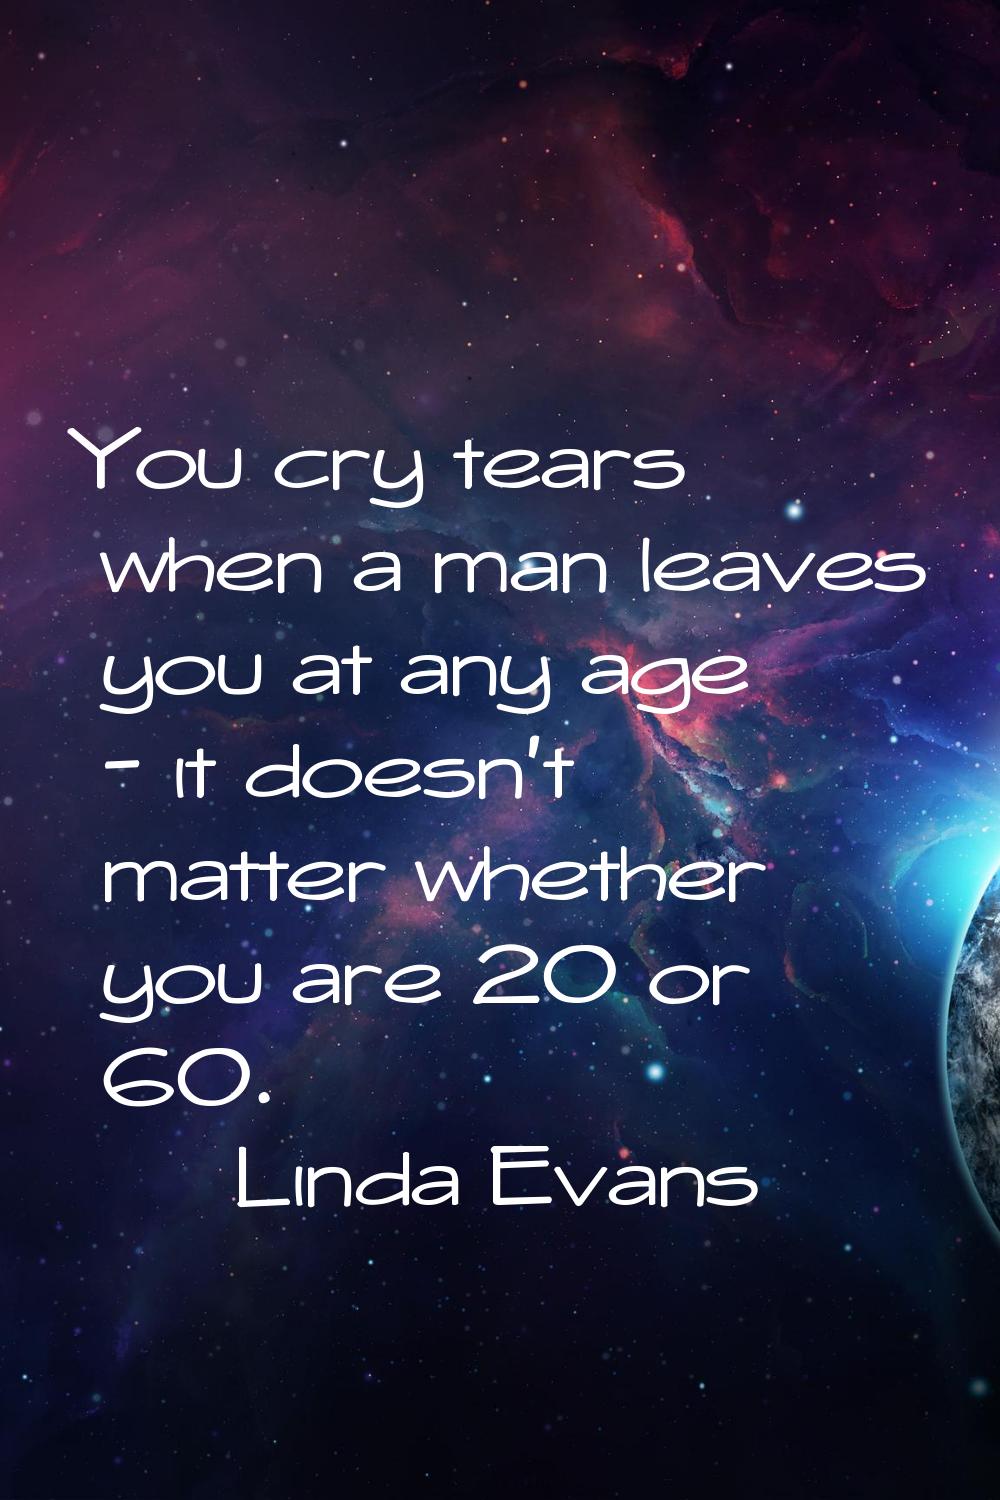 You cry tears when a man leaves you at any age - it doesn't matter whether you are 20 or 60.